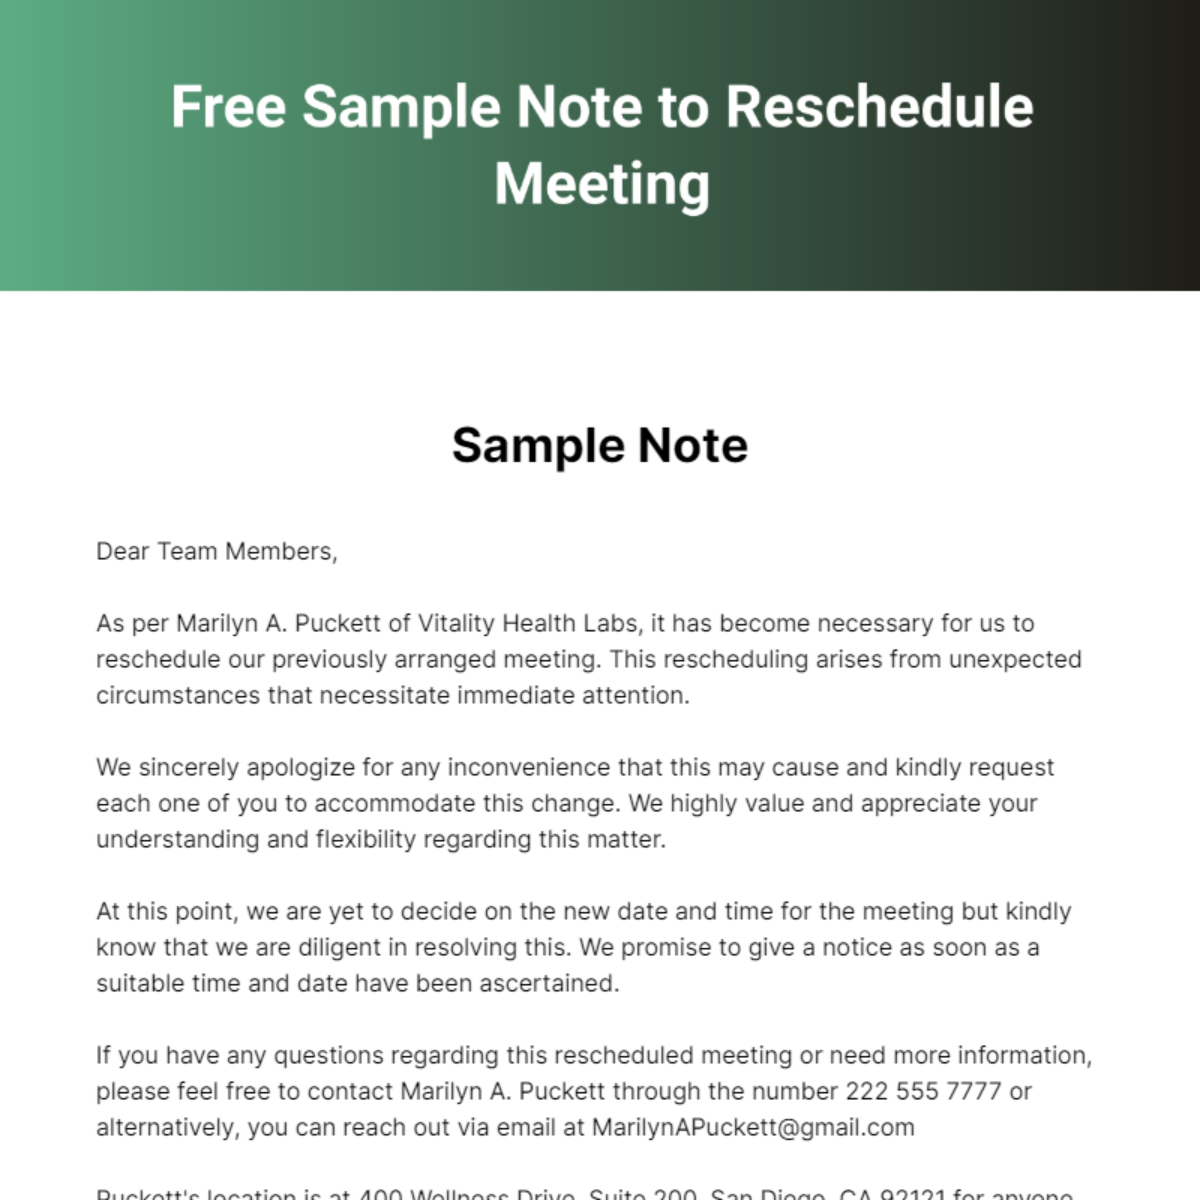 Free Sample Note to Reschedule Meeting Template